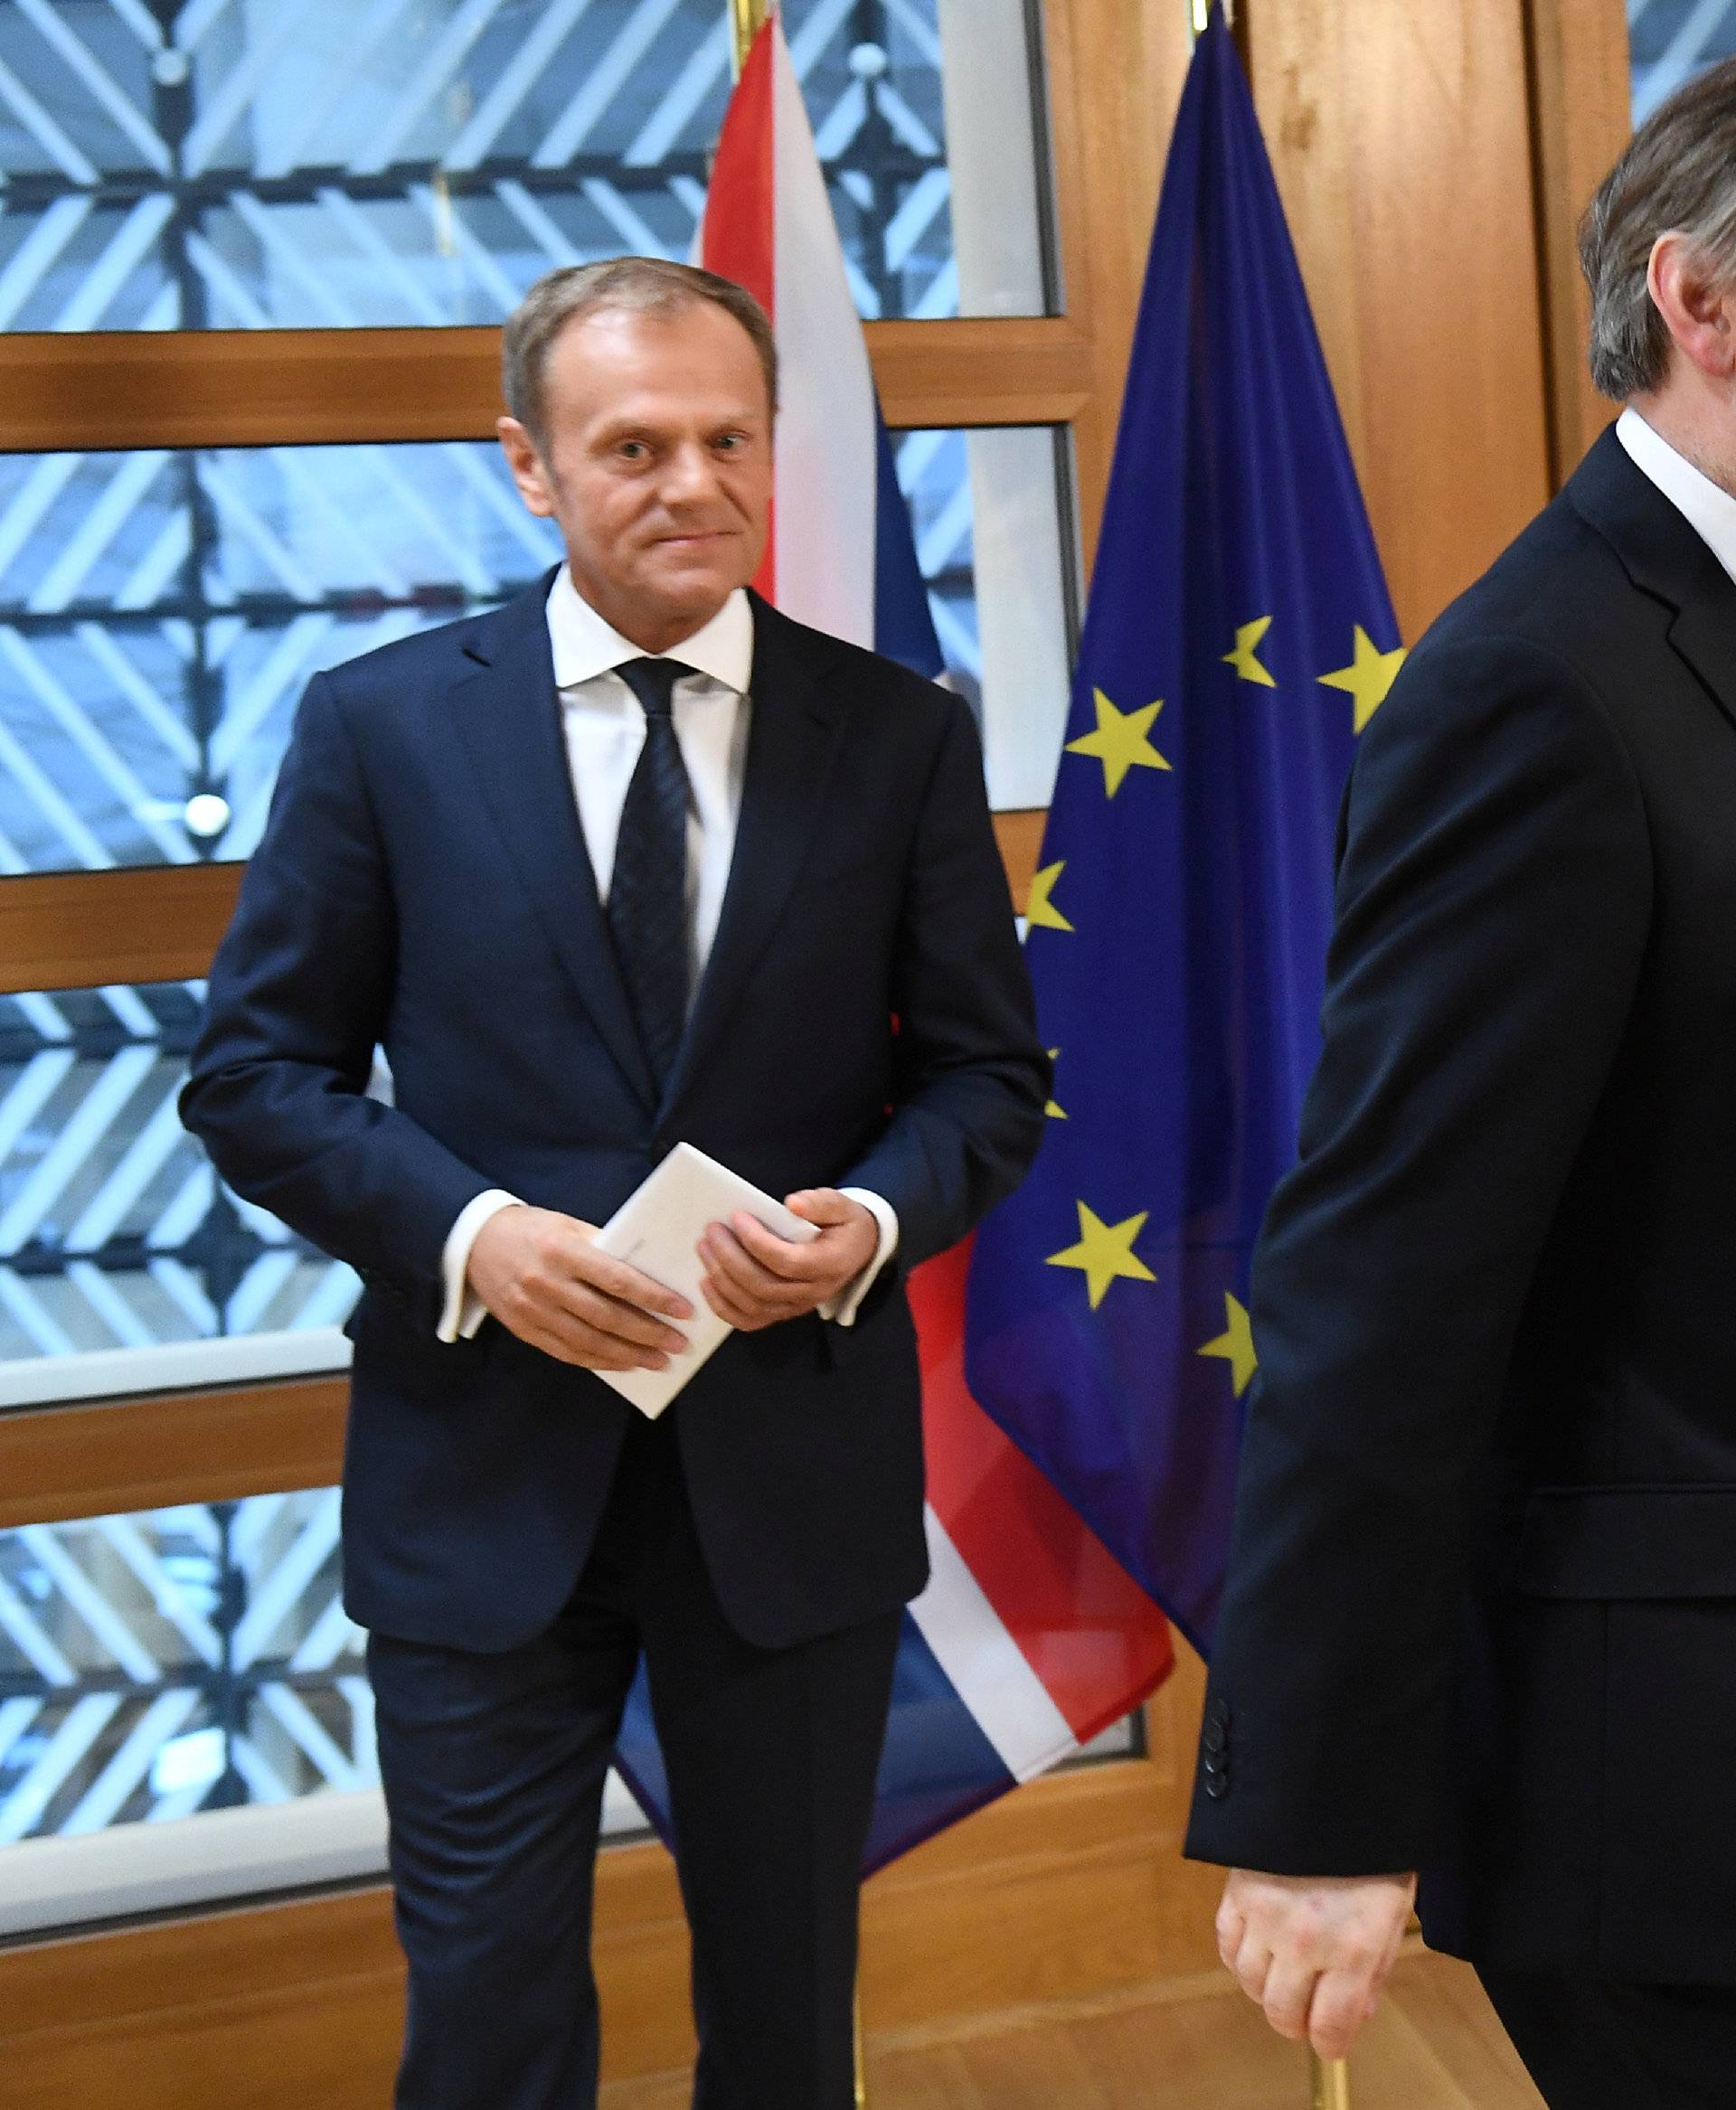 EU Council President Donald Tusk watches Britain's permanent representative to the European Union Tim Barrow leave after he hand delivered British Prime Minister Theresa May's Brexit letter in notice of the UK's intention to leave the bloc in Brussels